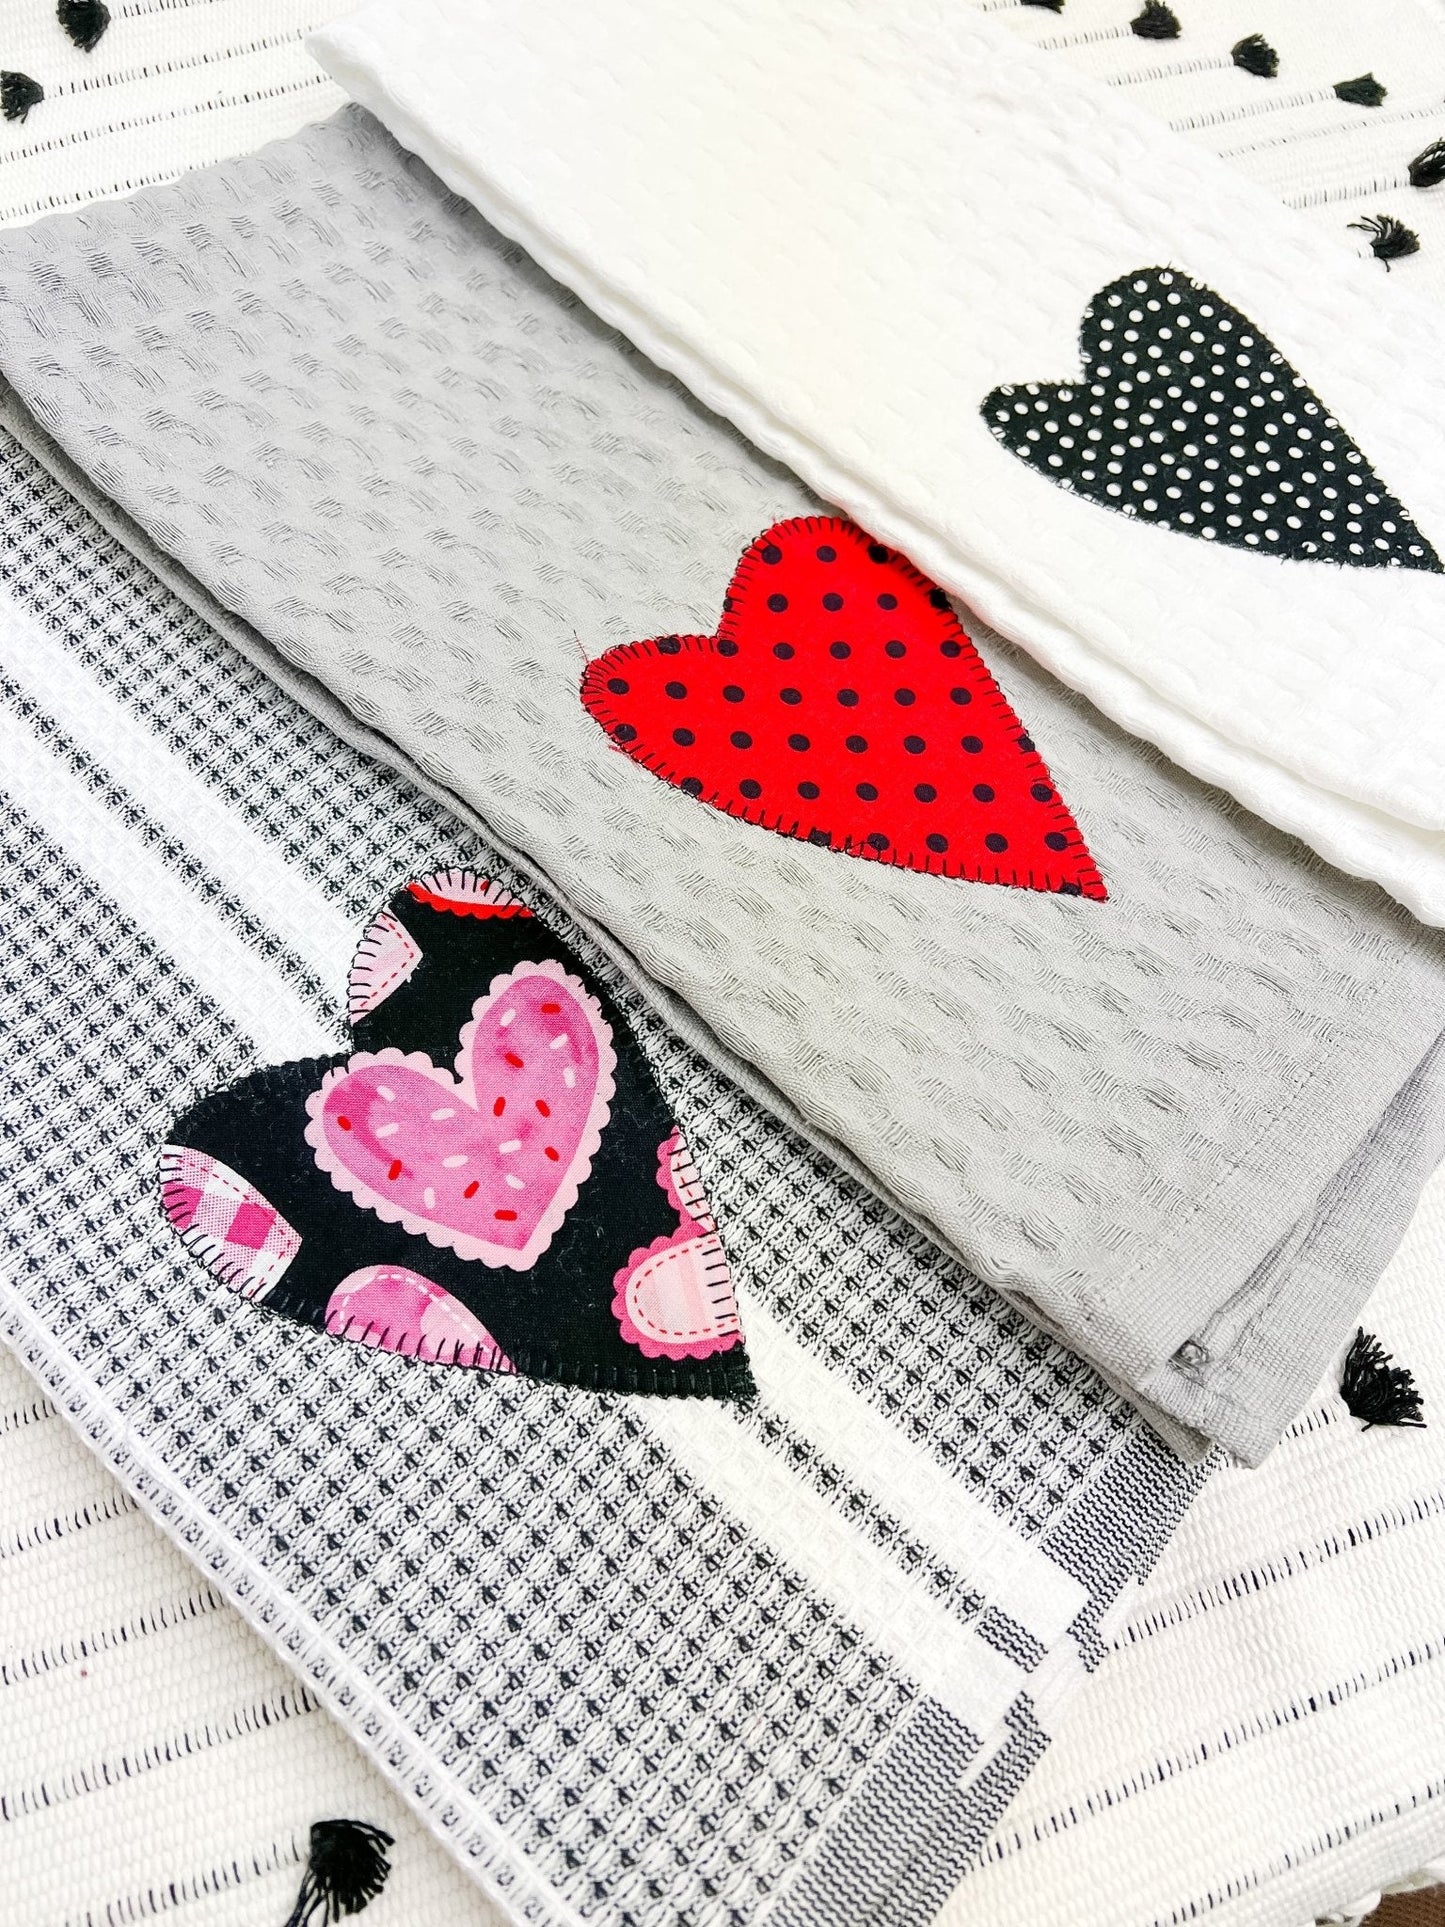 Grey/White/Black Heart Towel - Self Checkout at Creative Collab Collection - Miss Molly Designs, LLC